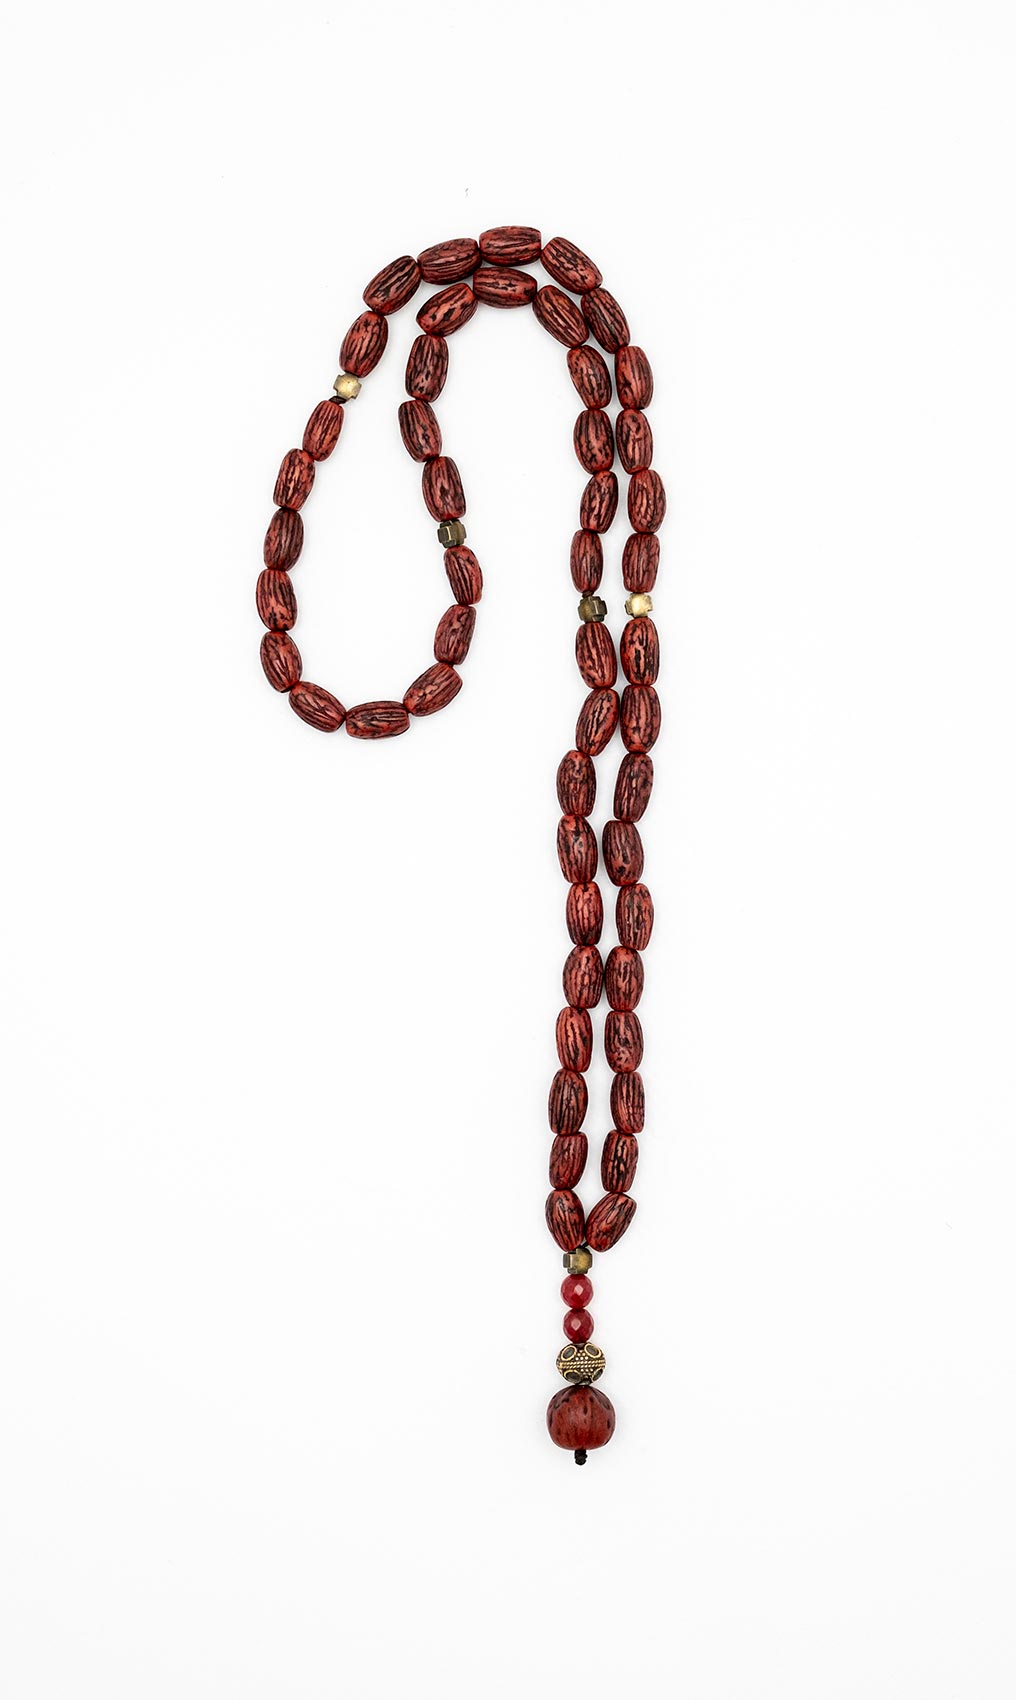 Catholic Prayer beads (Rosary) made of processed olive seeds, juniper seed, Agates and tin

